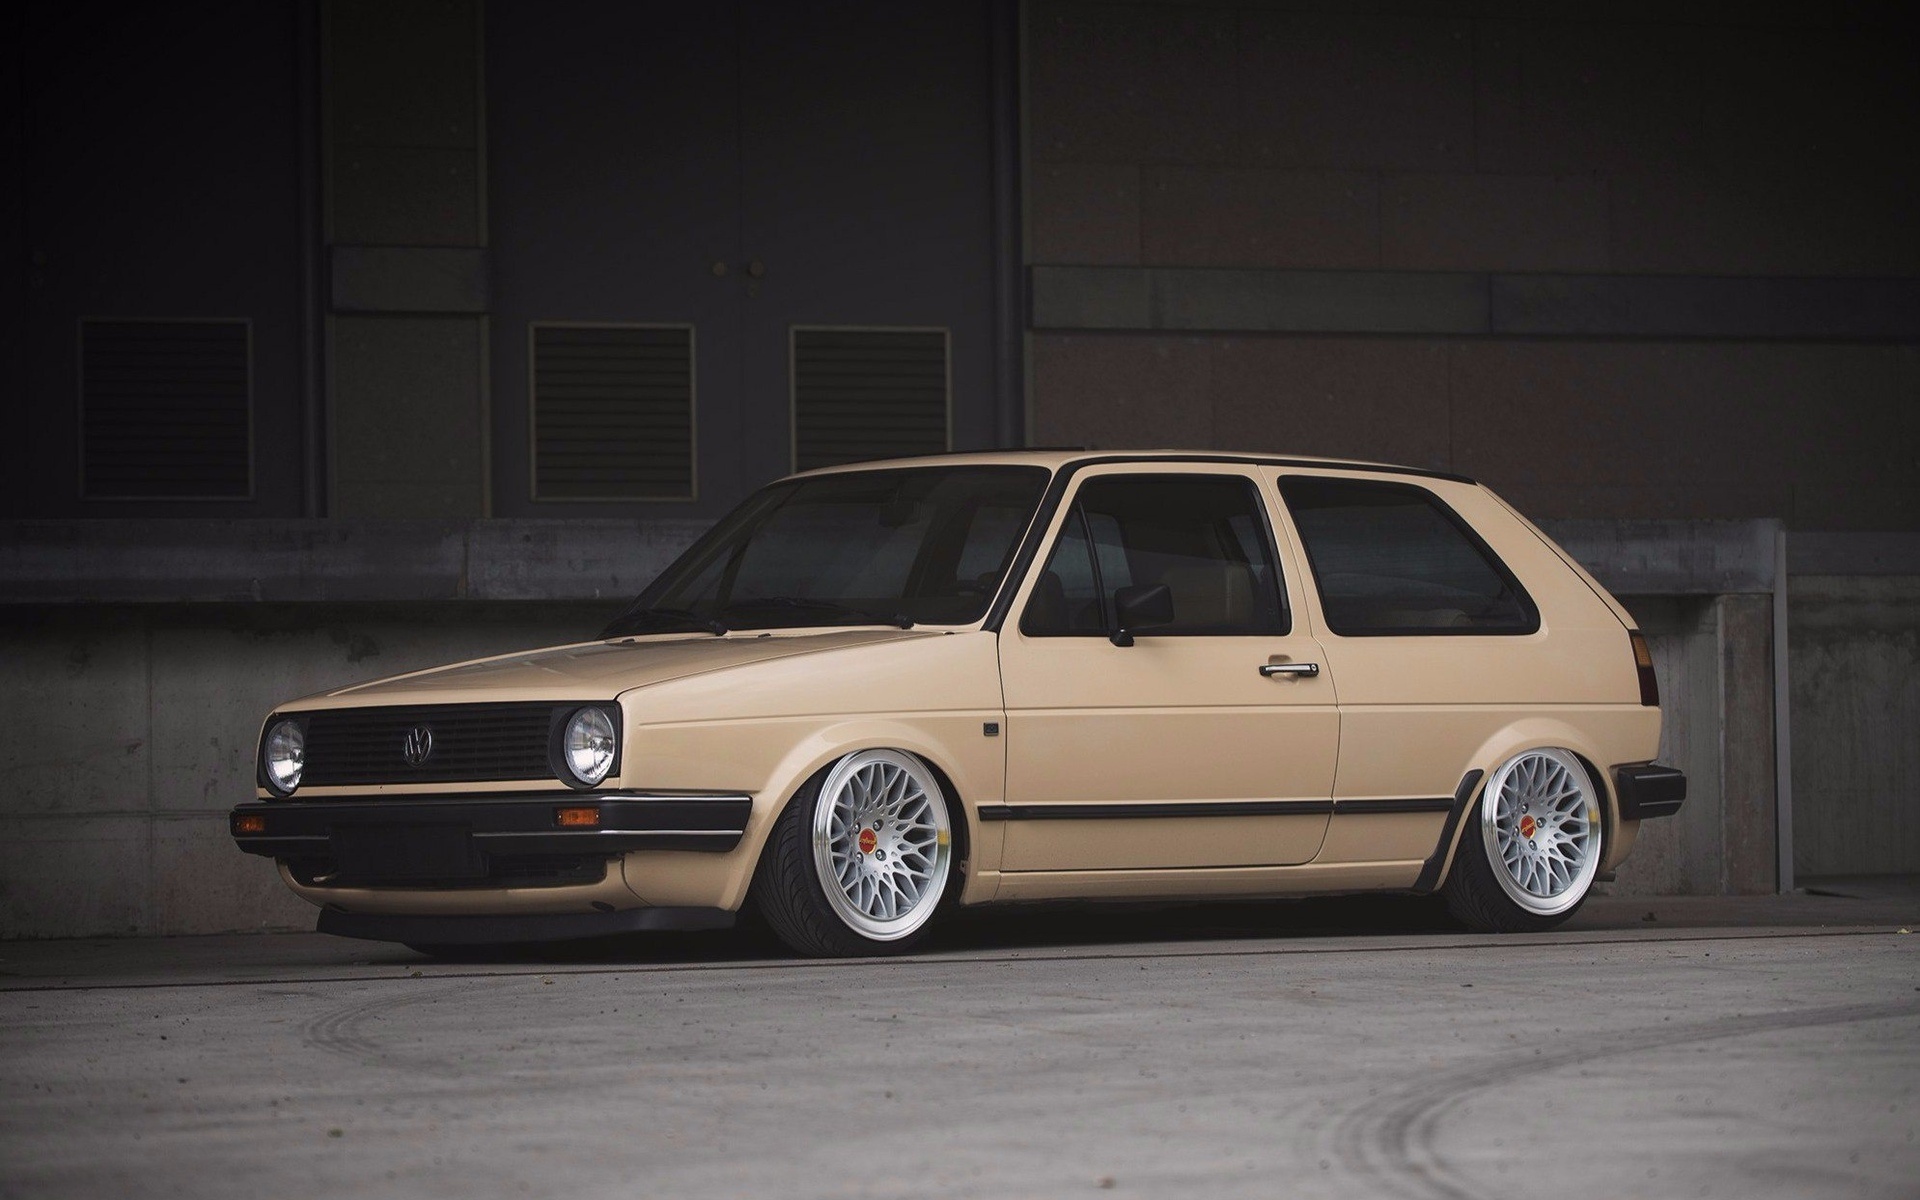 Volkswagen Golf, MK2 Tuning Stance, German cars, High-quality HD pictures, 1920x1200 HD Desktop